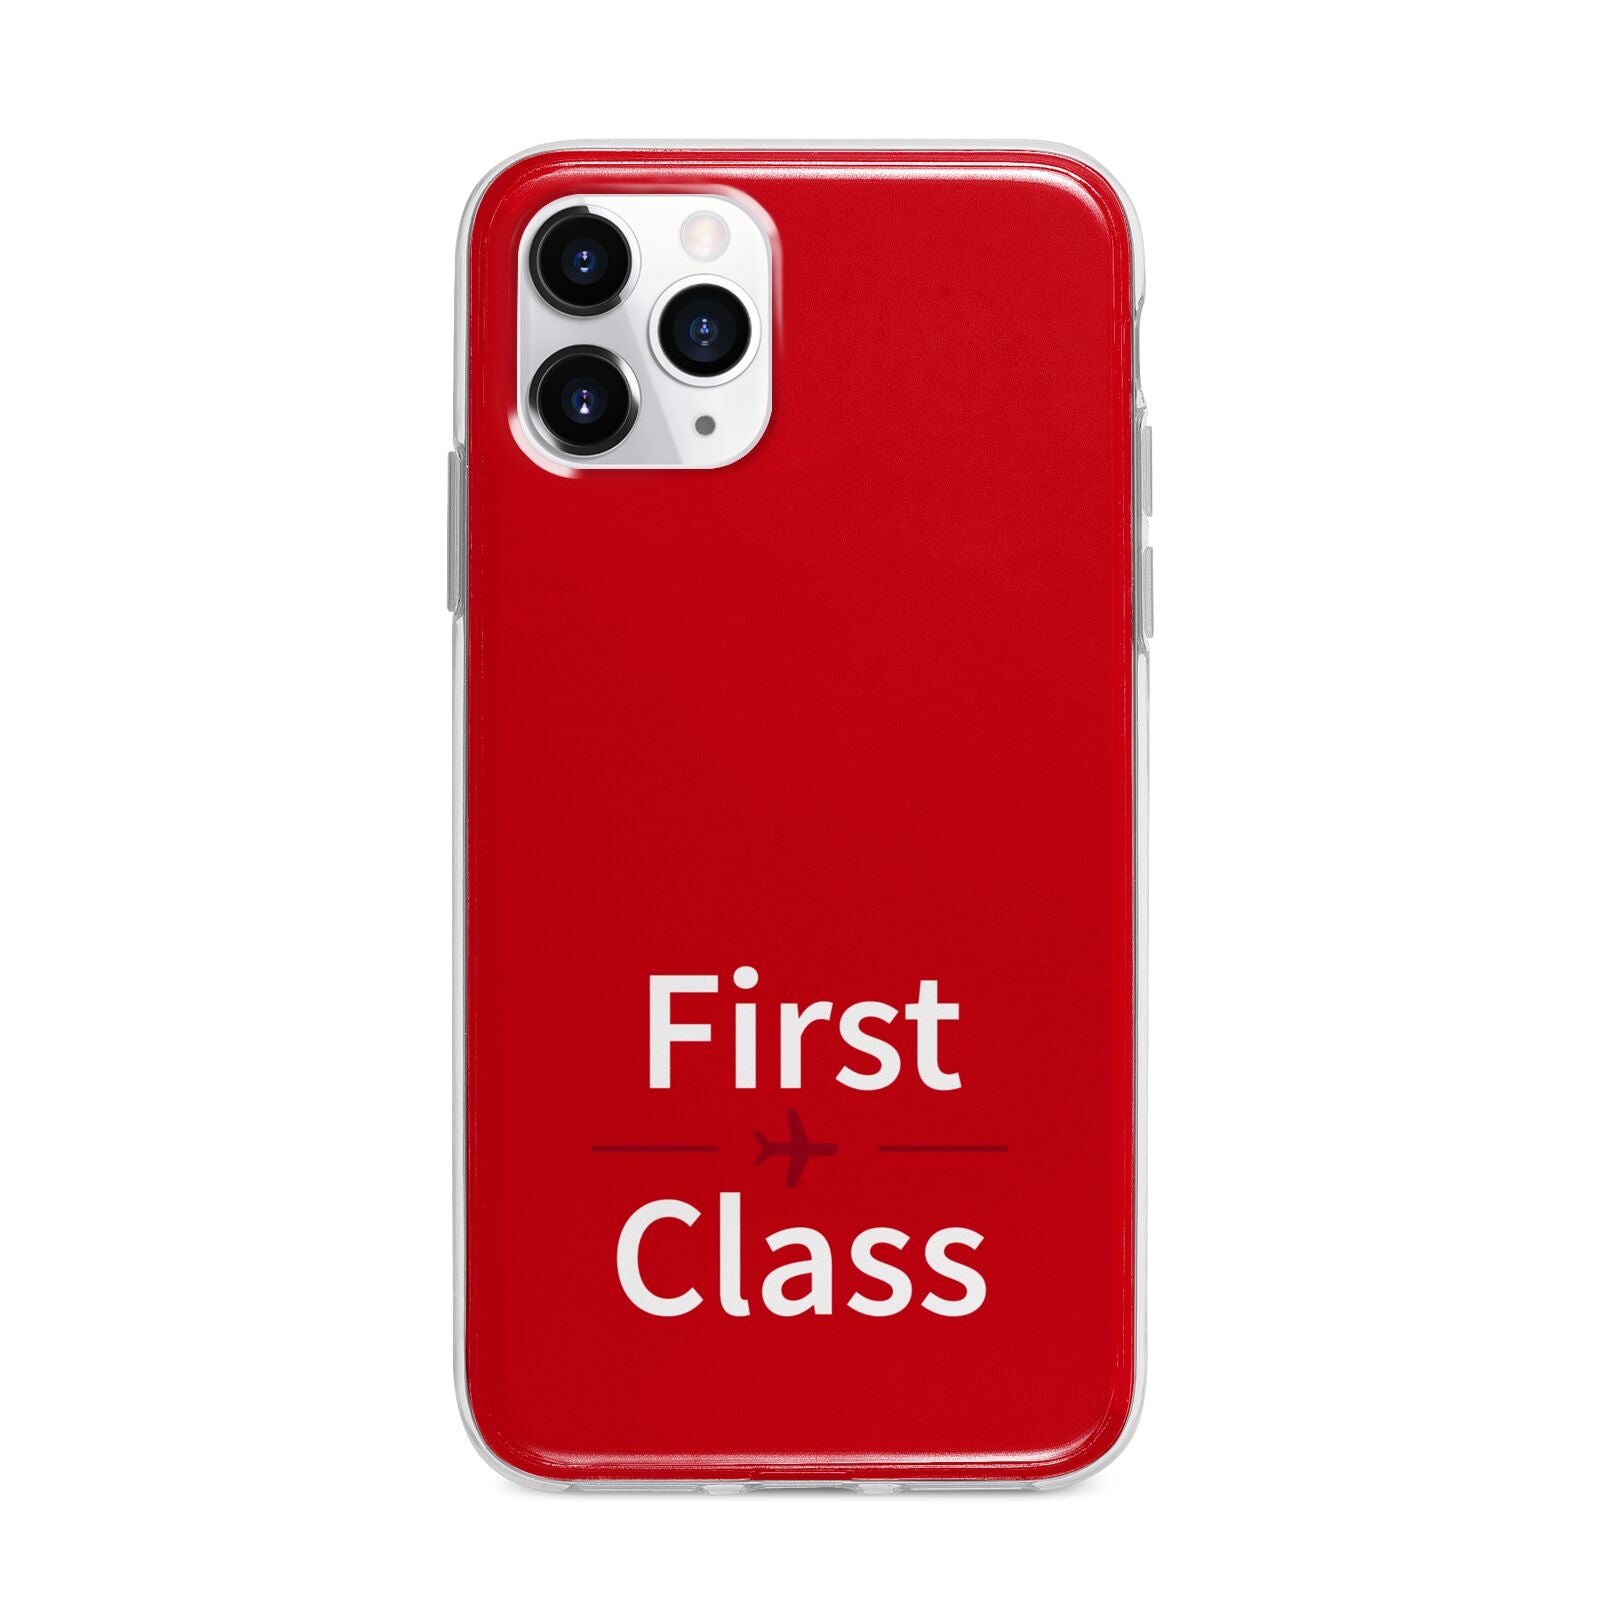 First Class Apple iPhone 11 Pro Max in Silver with Bumper Case